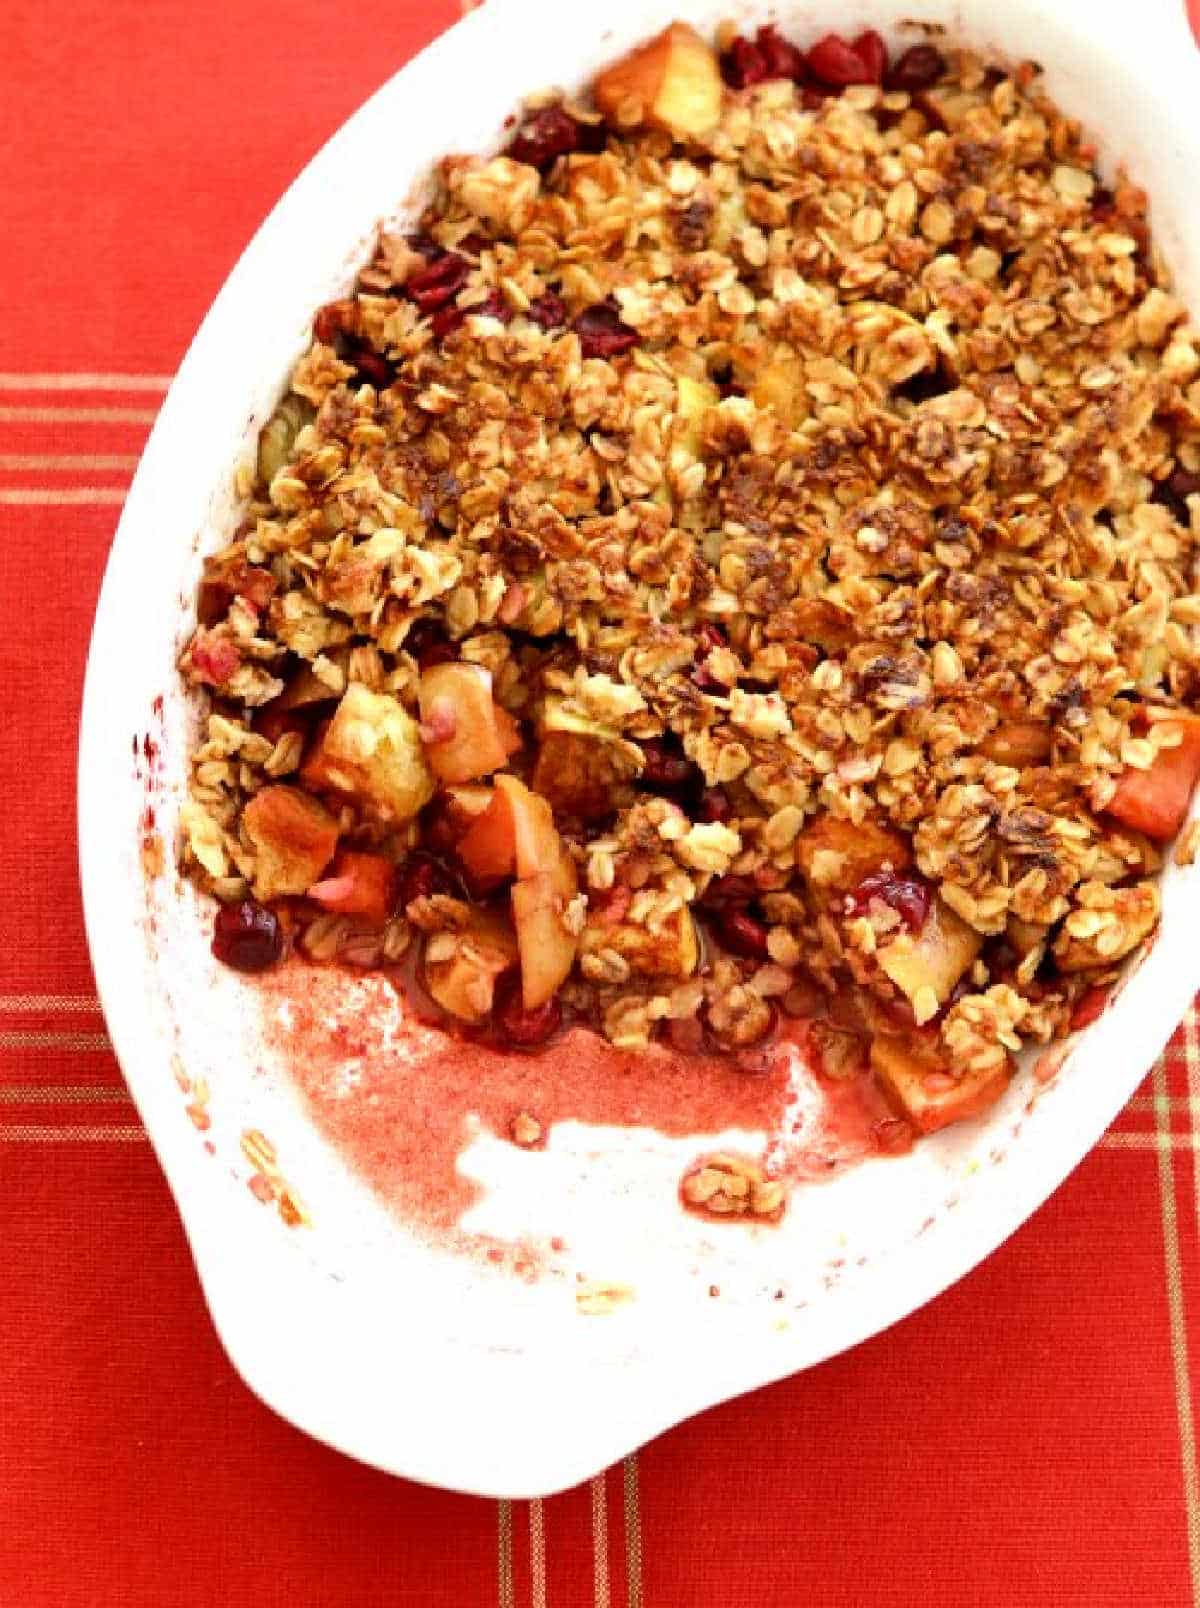 Cranberry Apple Crisp in baking dish with some eaten